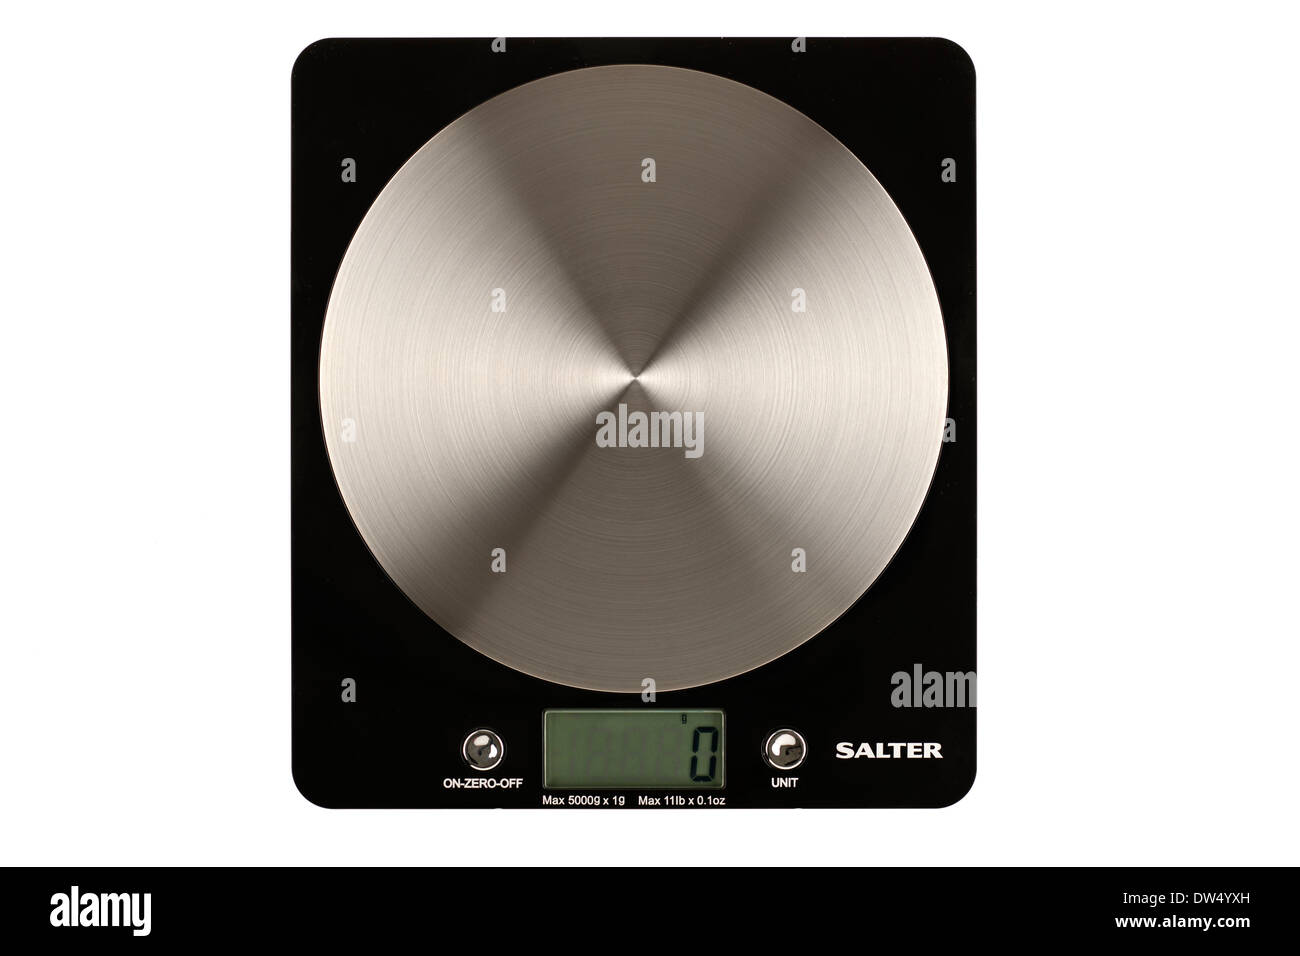 https://c8.alamy.com/comp/DW4YXH/salter-disc-type-electronic-kitchen-weighing-scales-DW4YXH.jpg